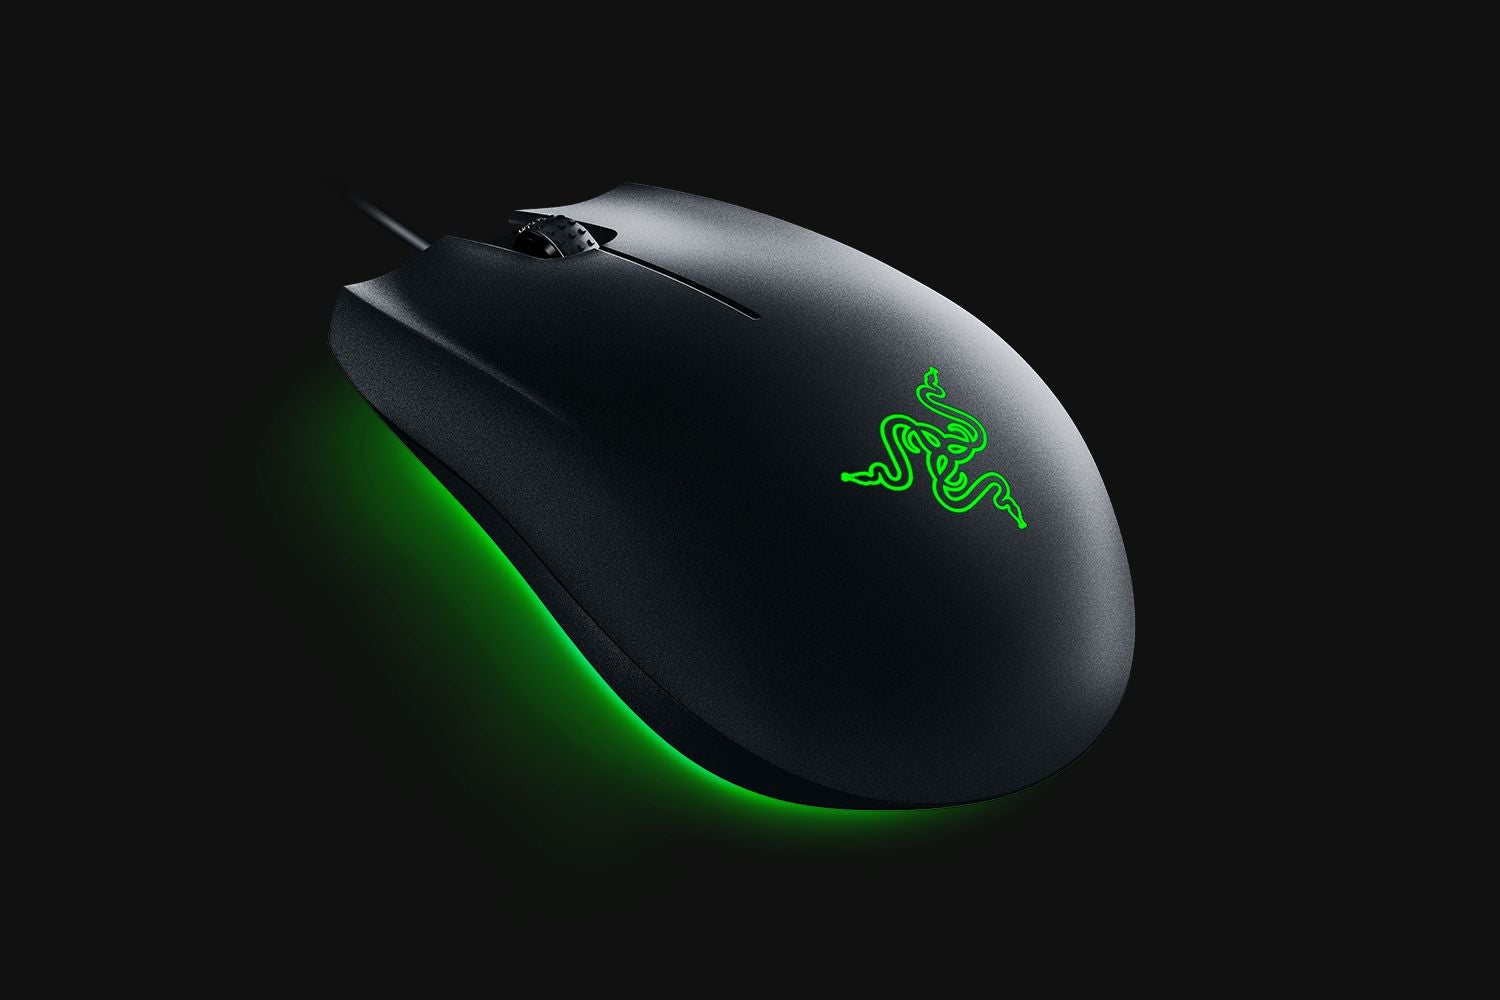 Image for The Abyssus Essential is Razer's new entry-level gaming mouse, complete with badass lighting